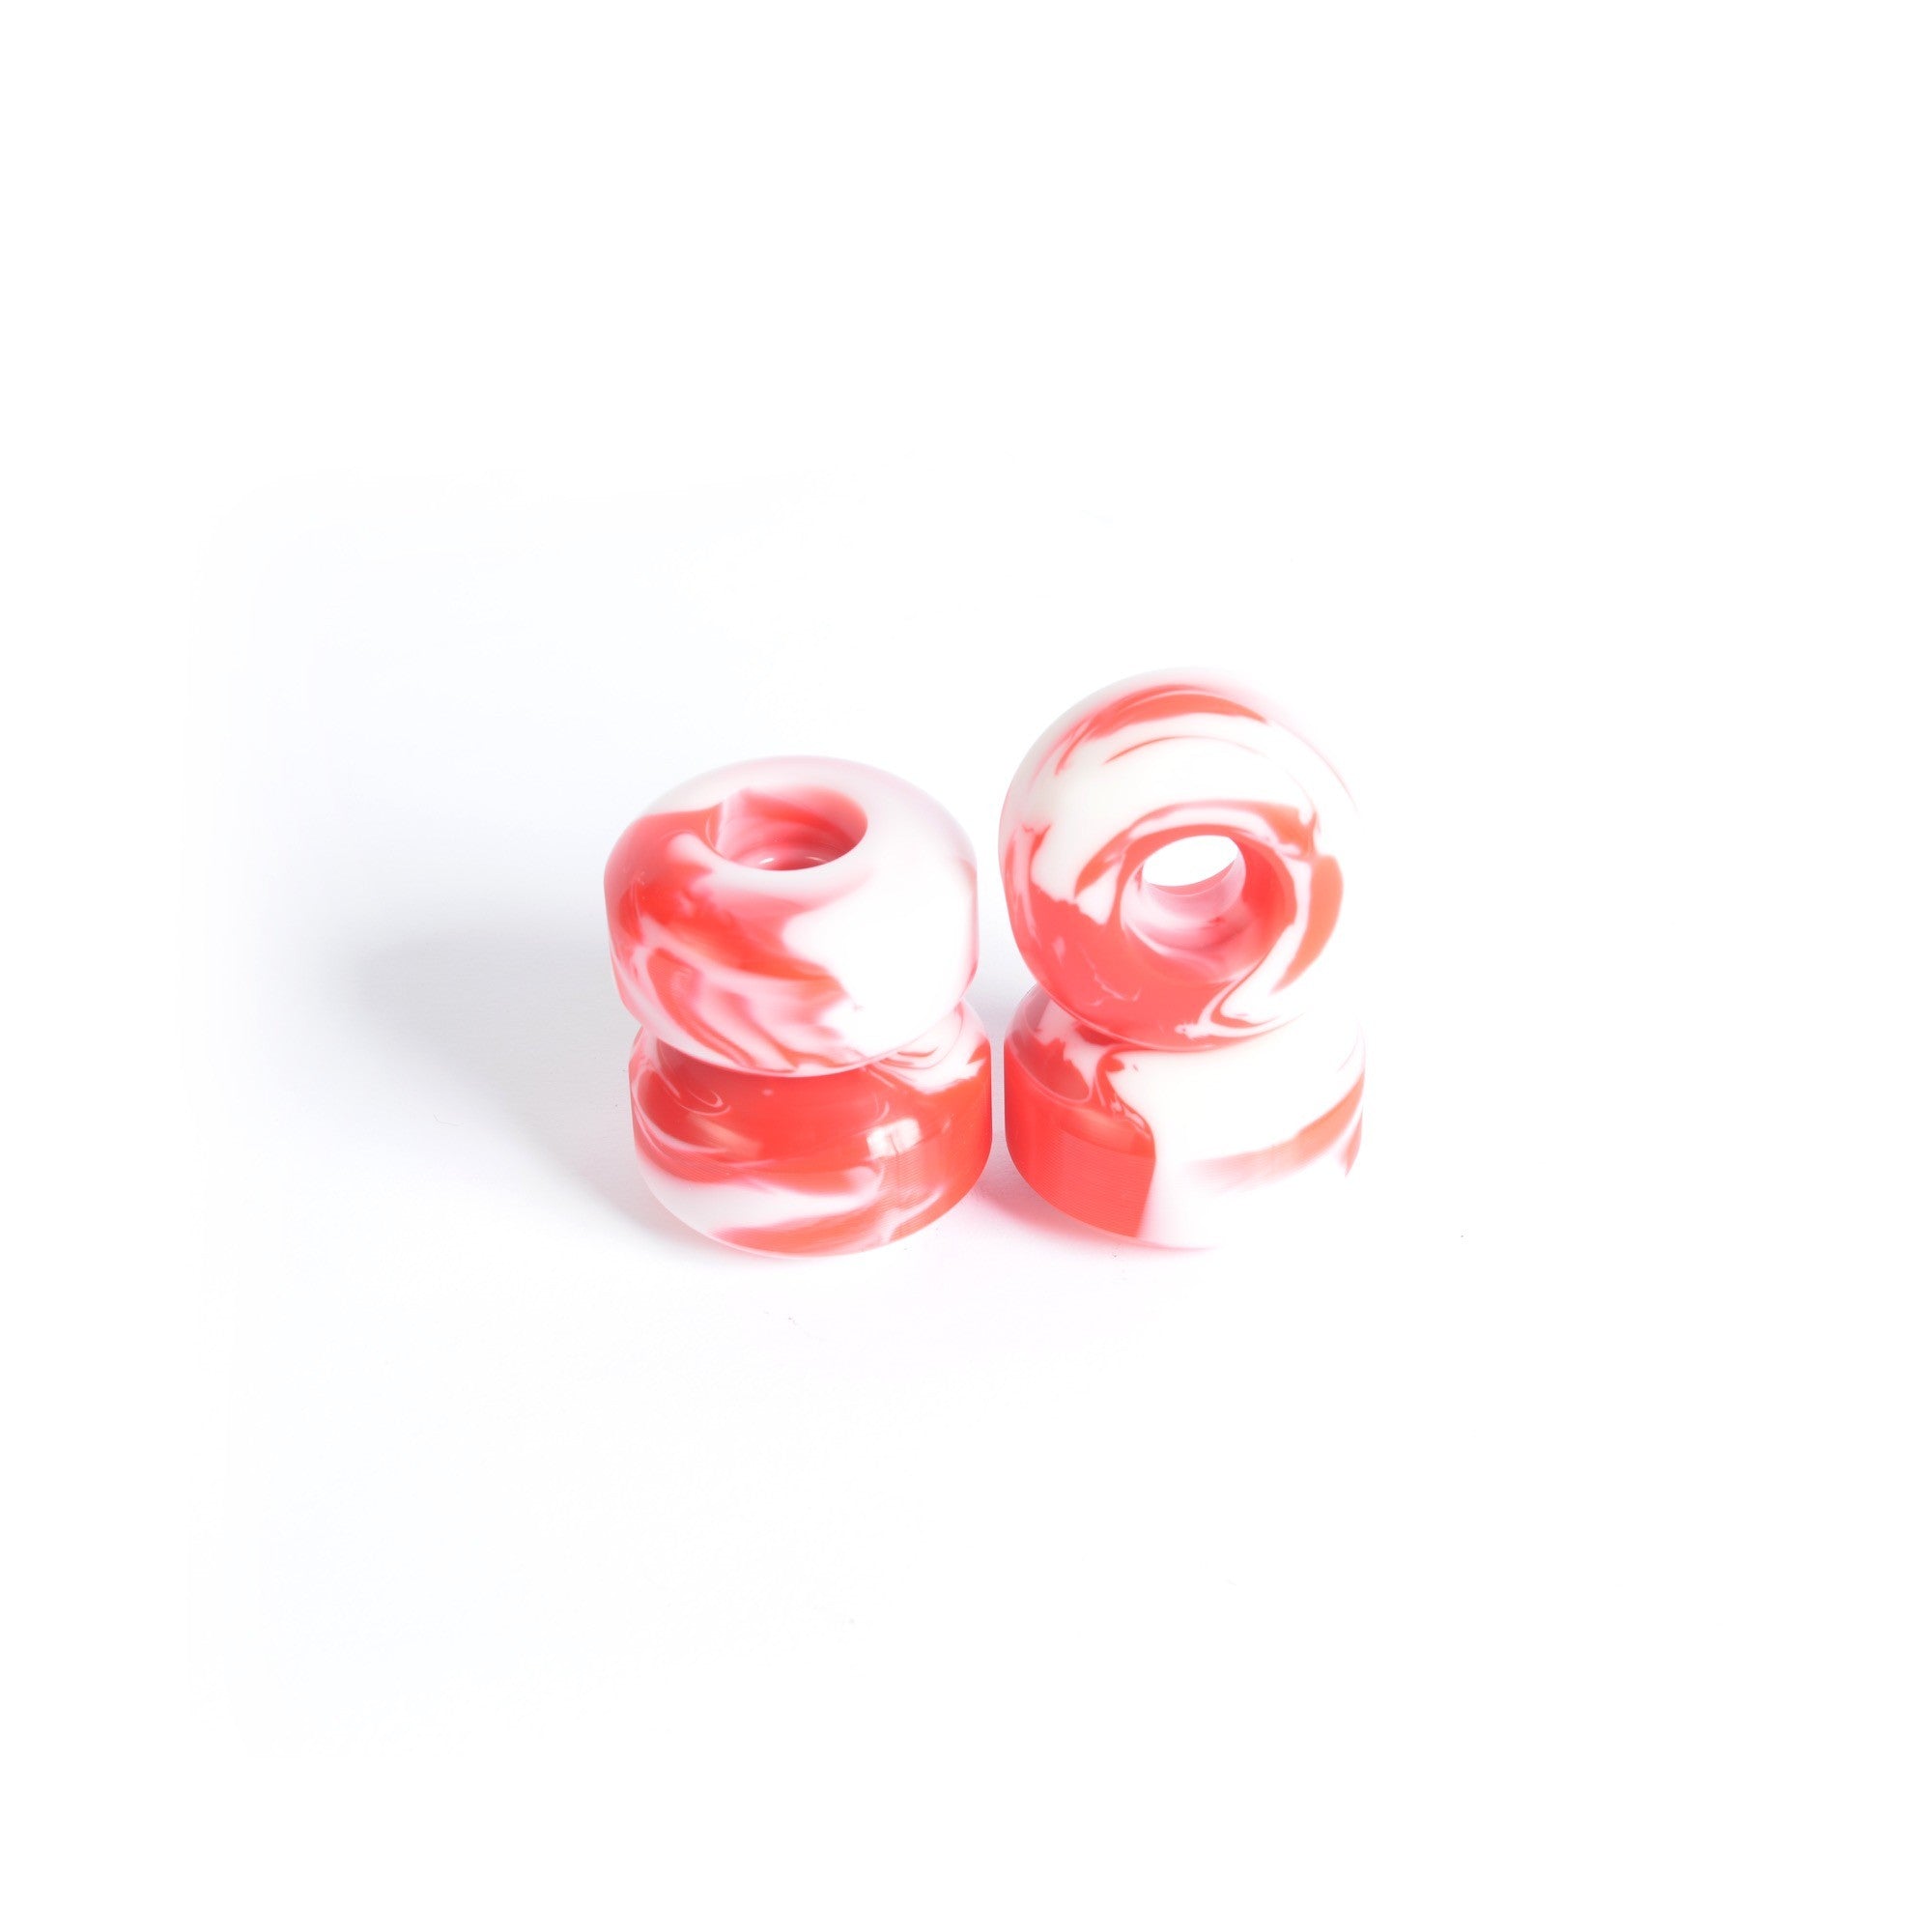 Roues skateboard - YOCAHER 52x30mm 99a - White/Red Swirl